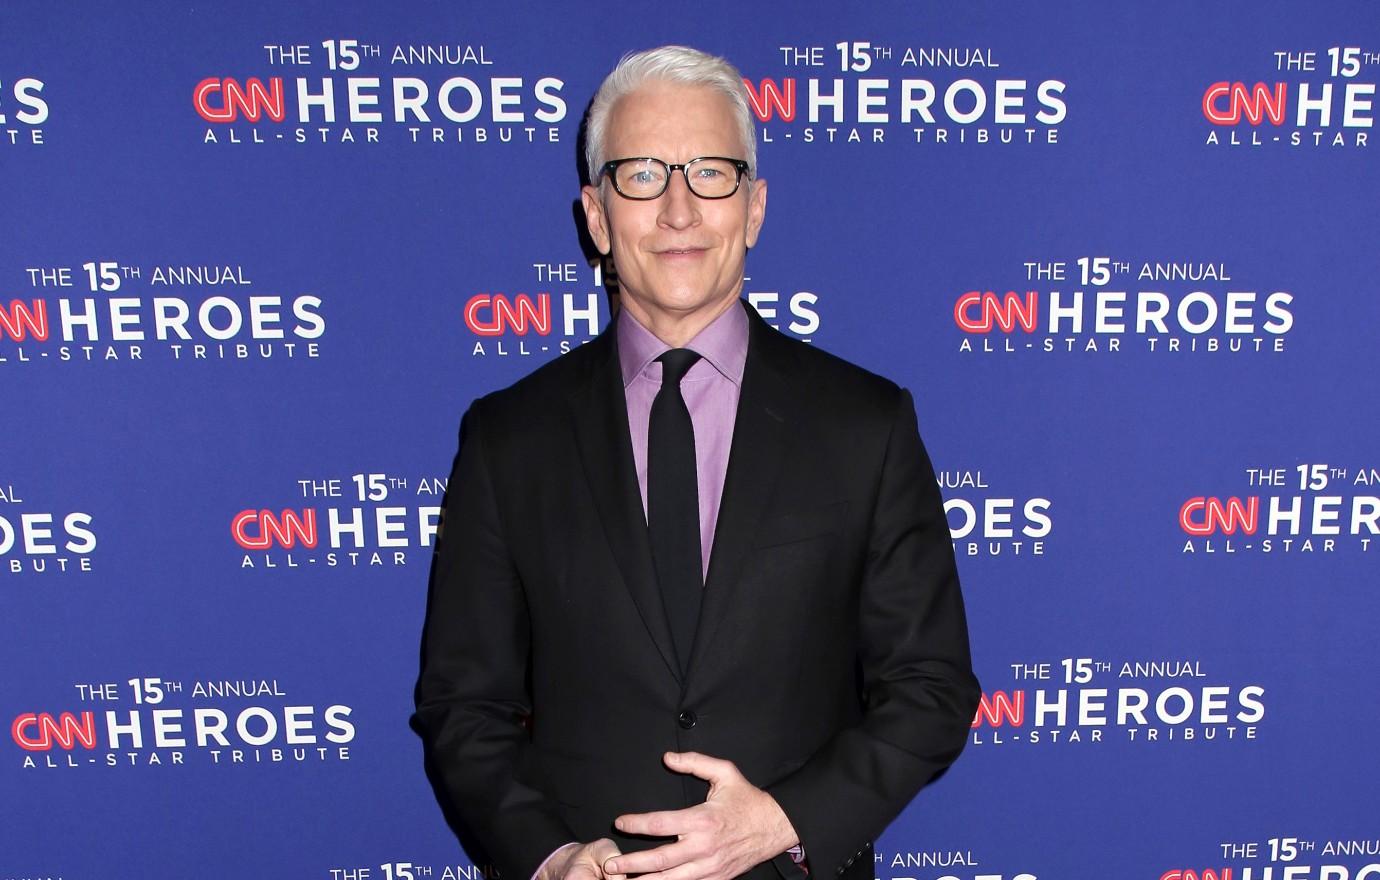 Why Kathy Griffins Peace Plan With Anderson Cooper Failed picture image picture